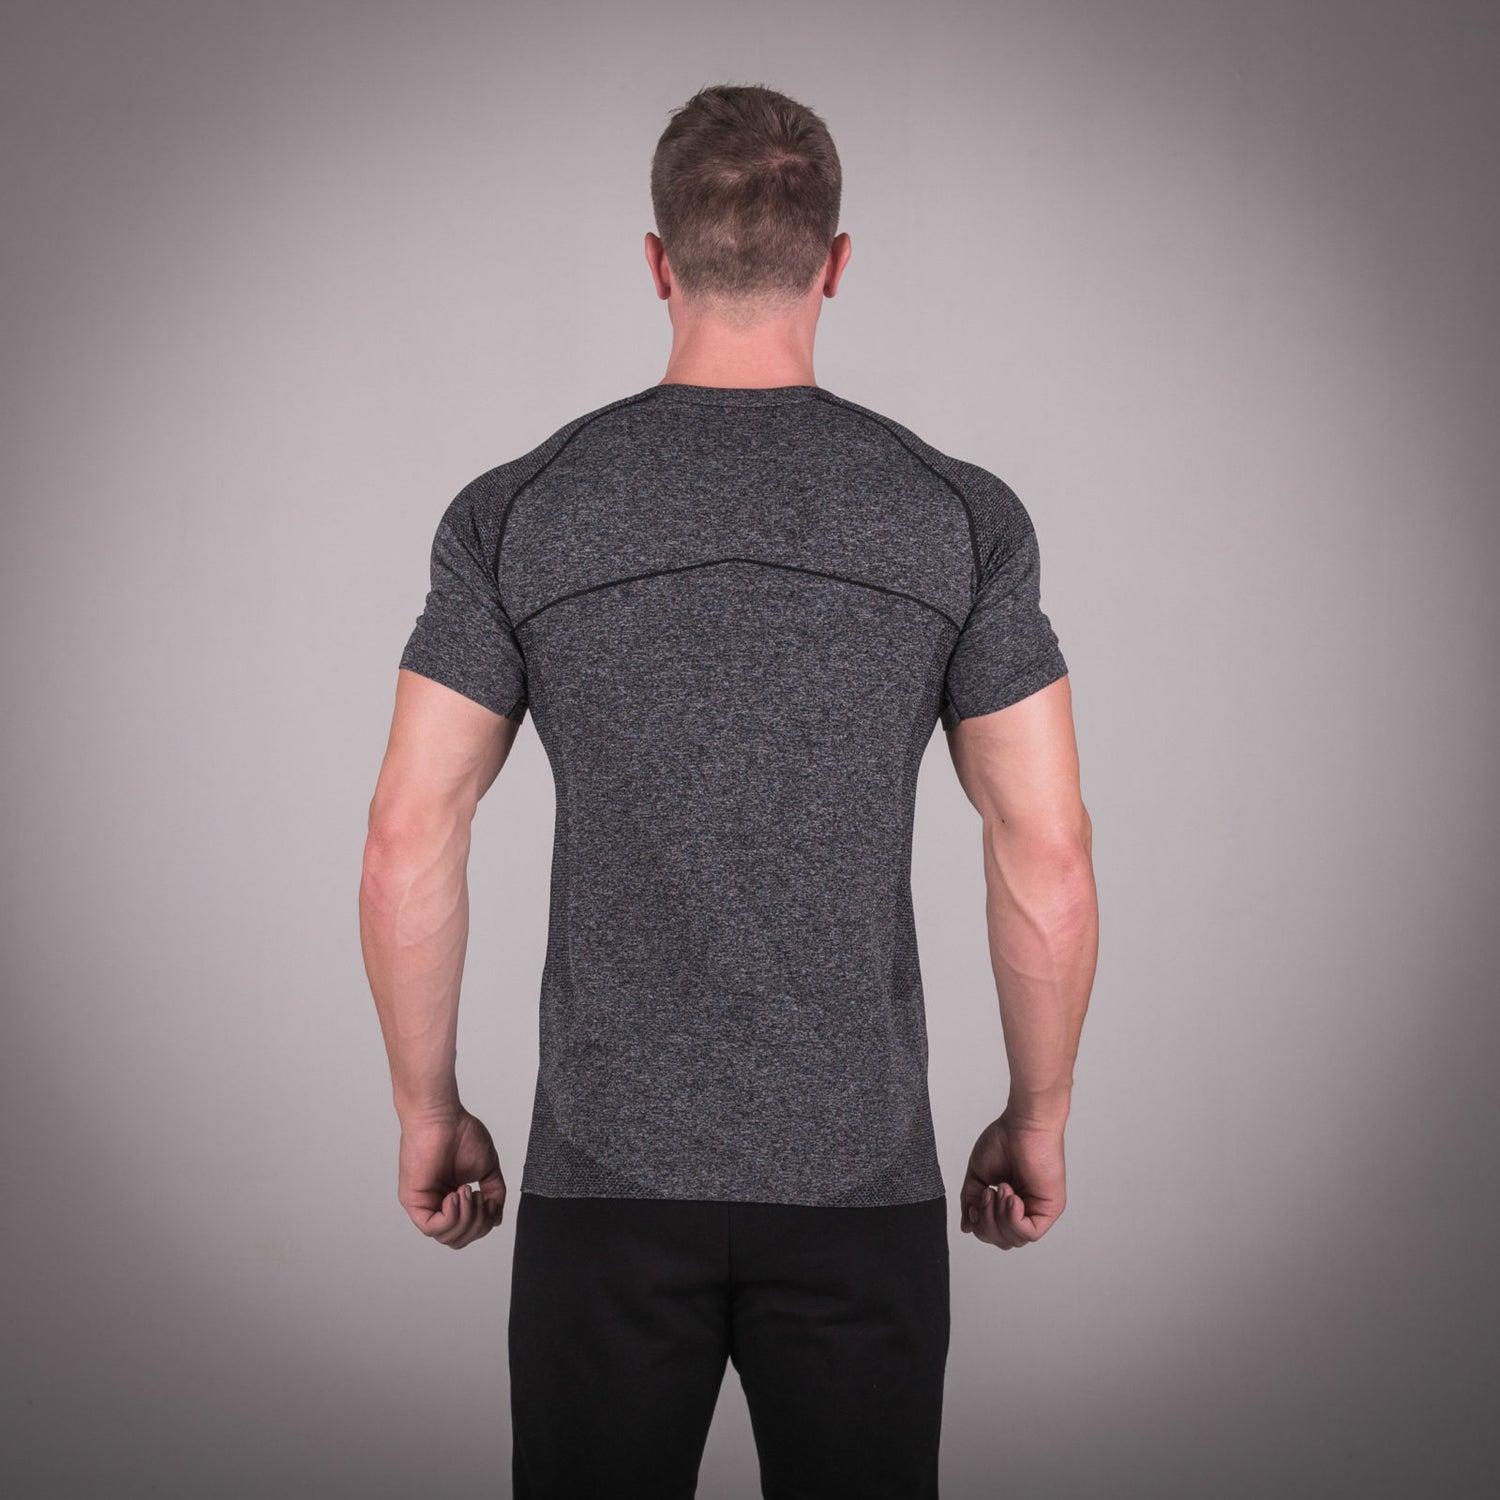 squatwolf-gym-wear-seamless-dry-knit-tee-grey-workout-t-shirts-for-men